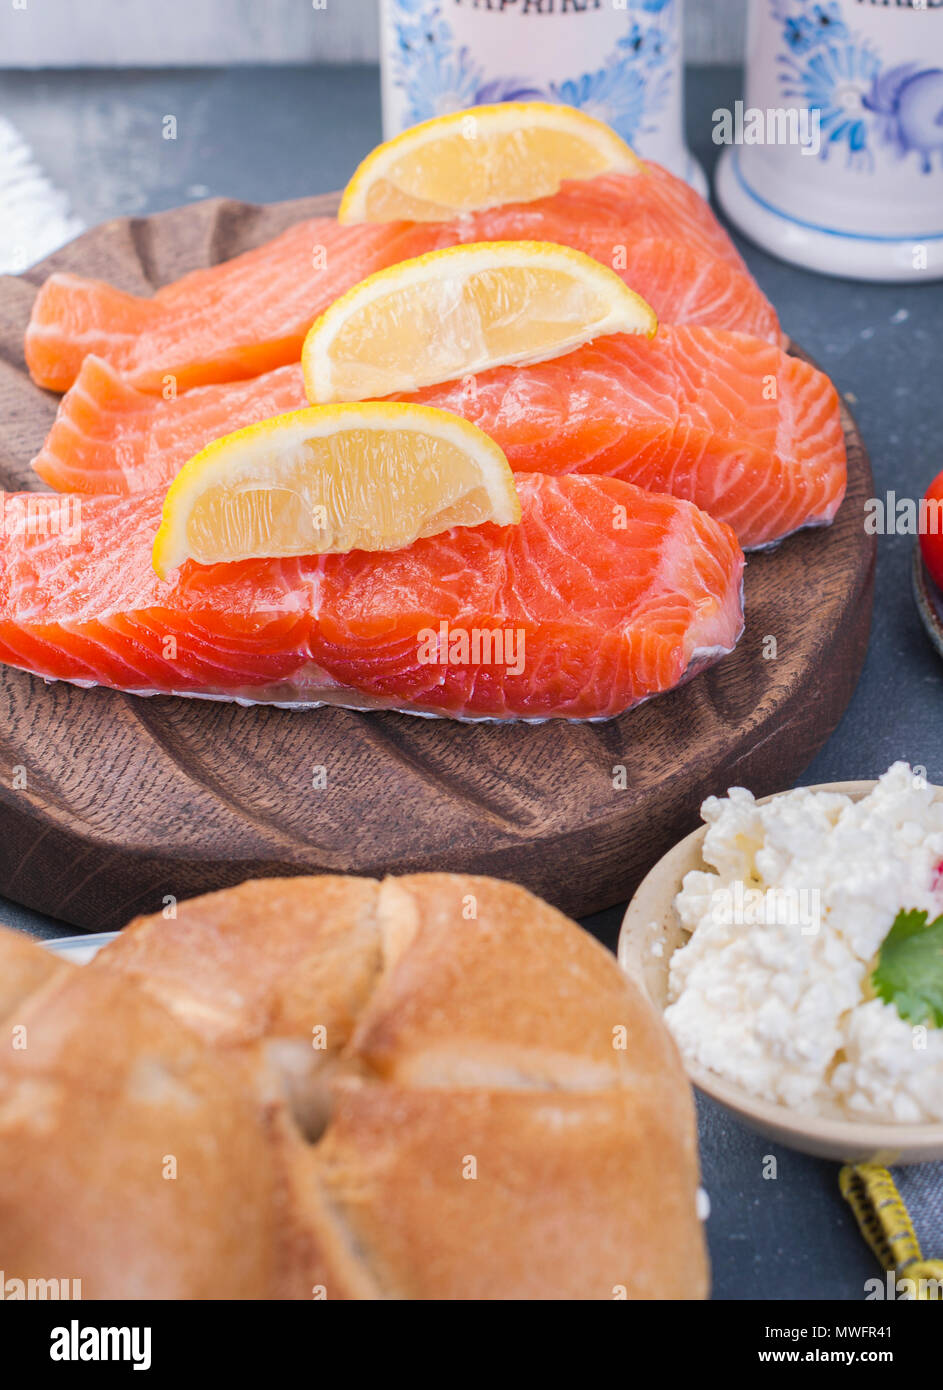 Salmon fillet with lemon, ingredients for cooking dinner. Stock Photo